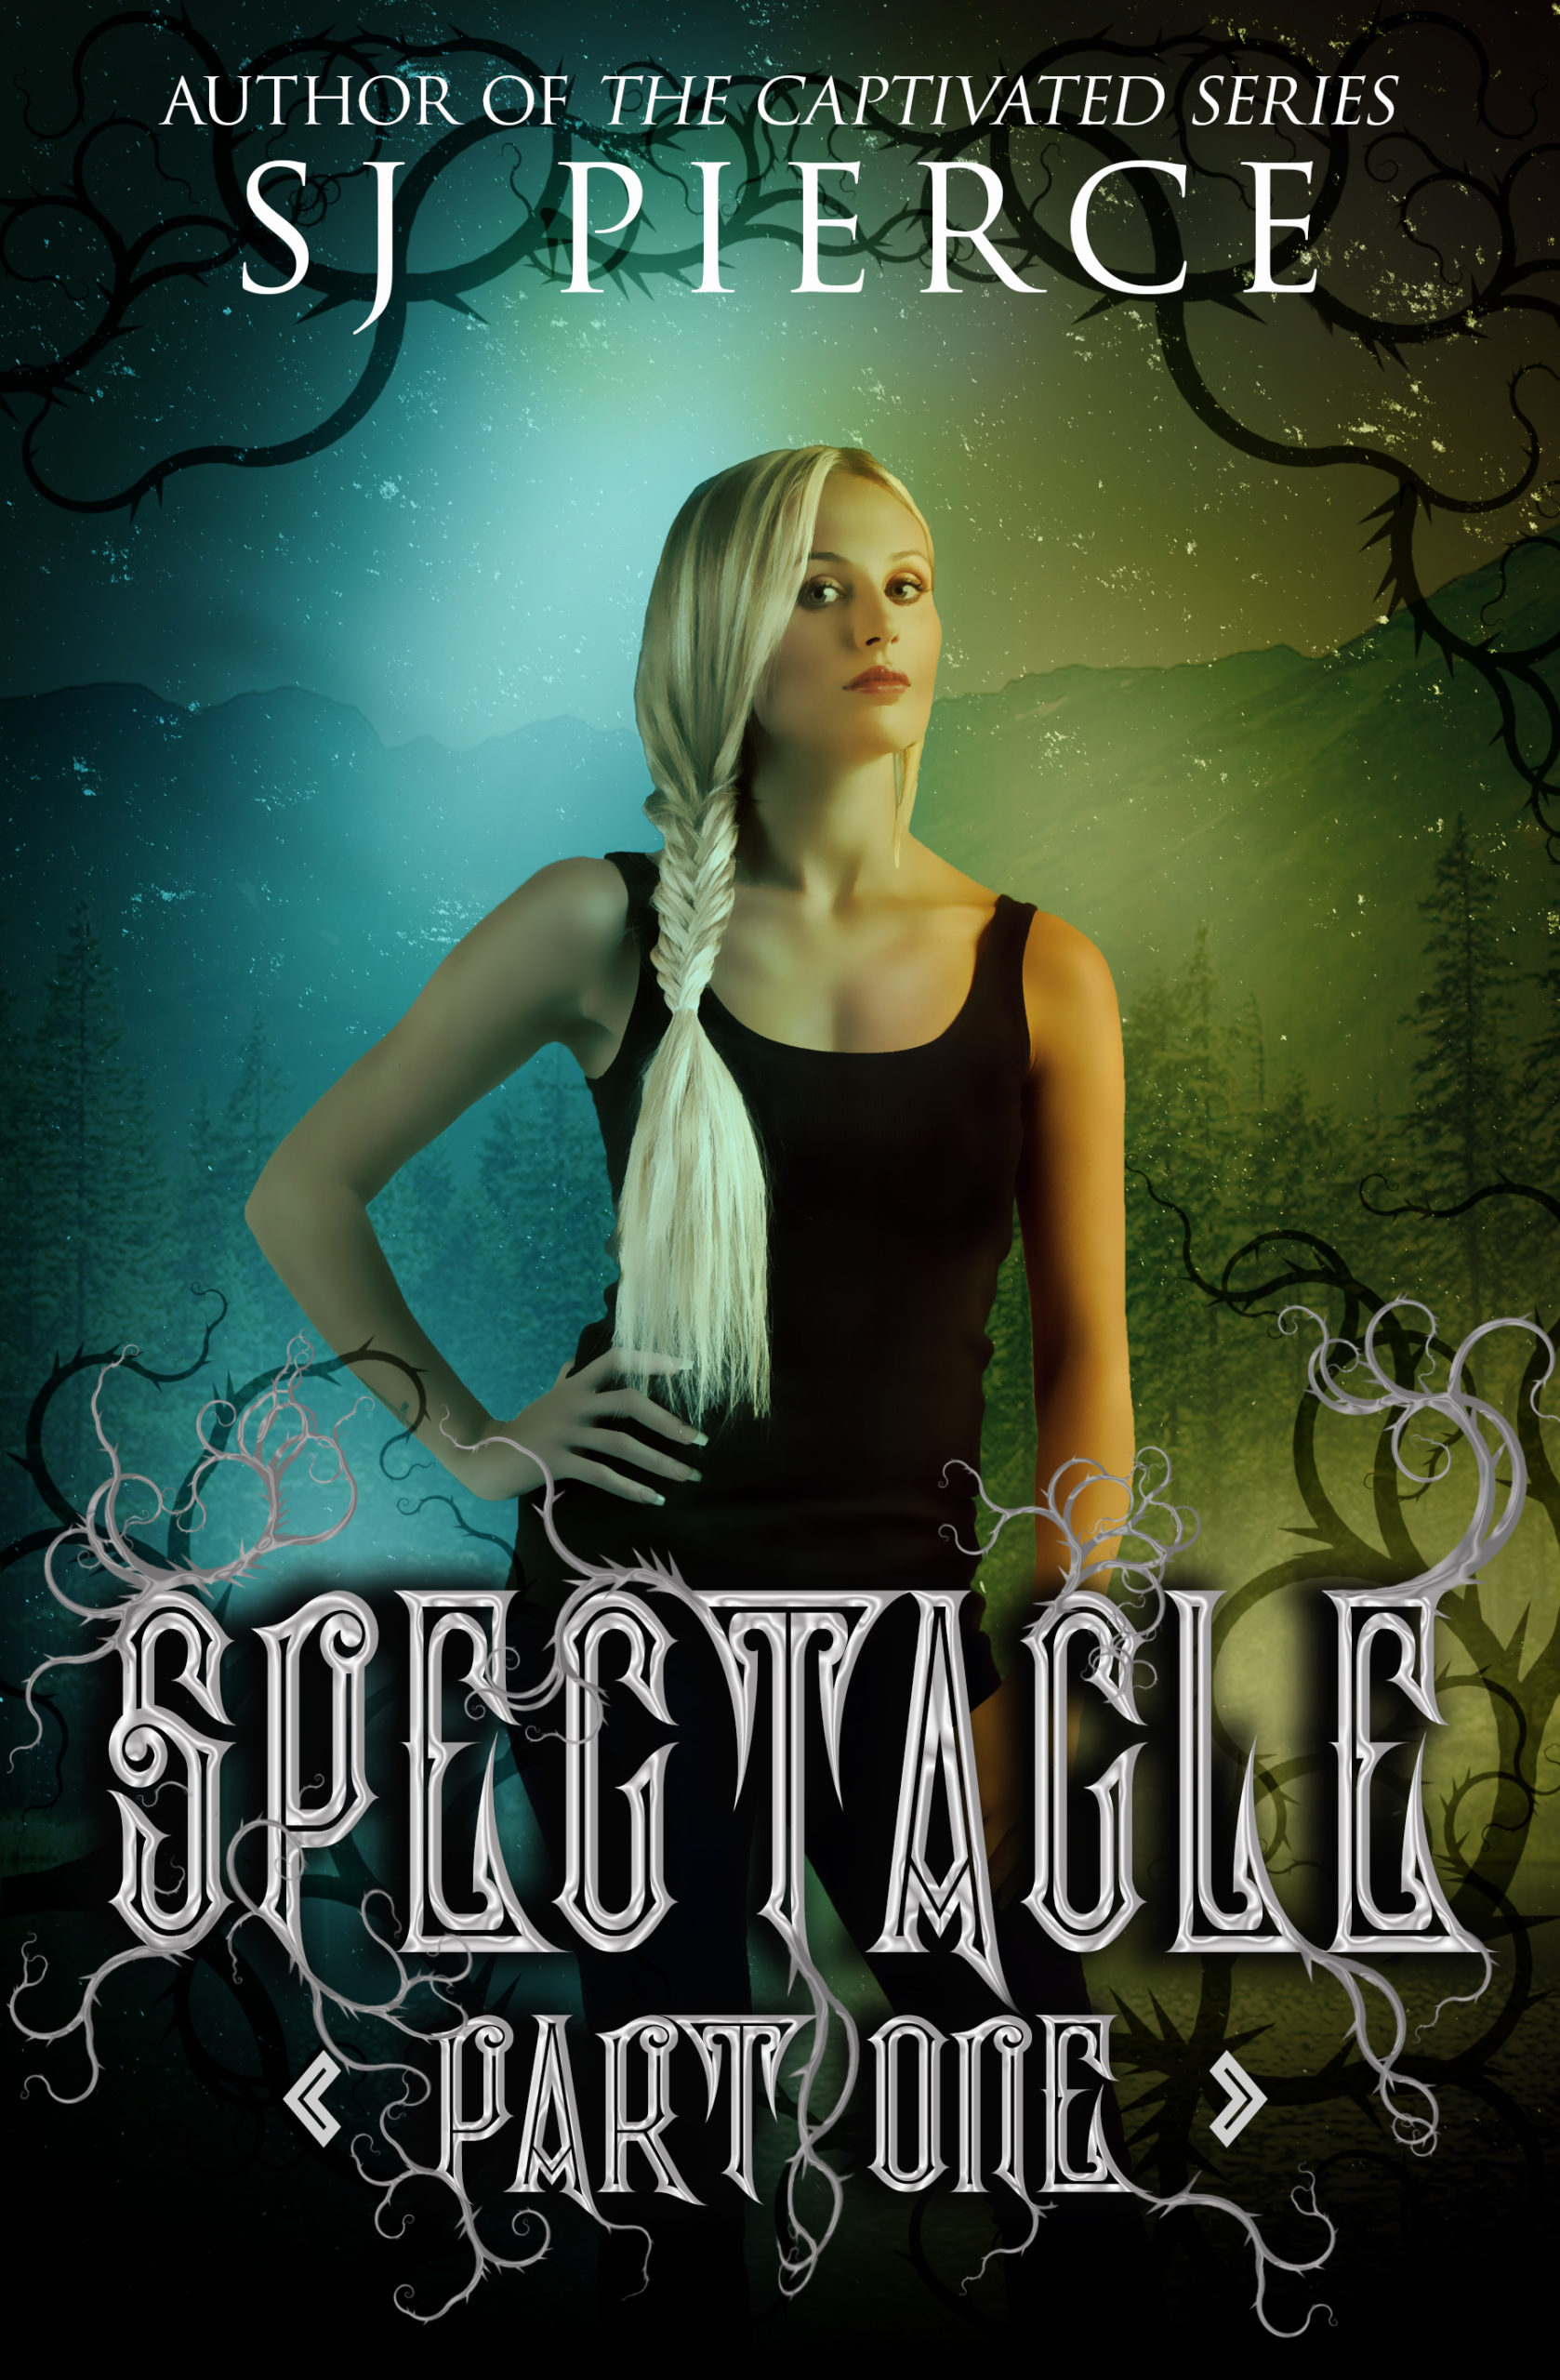 Spectacle: A Young Adult Dystopian (The Spectacle Trilogy Book 1)